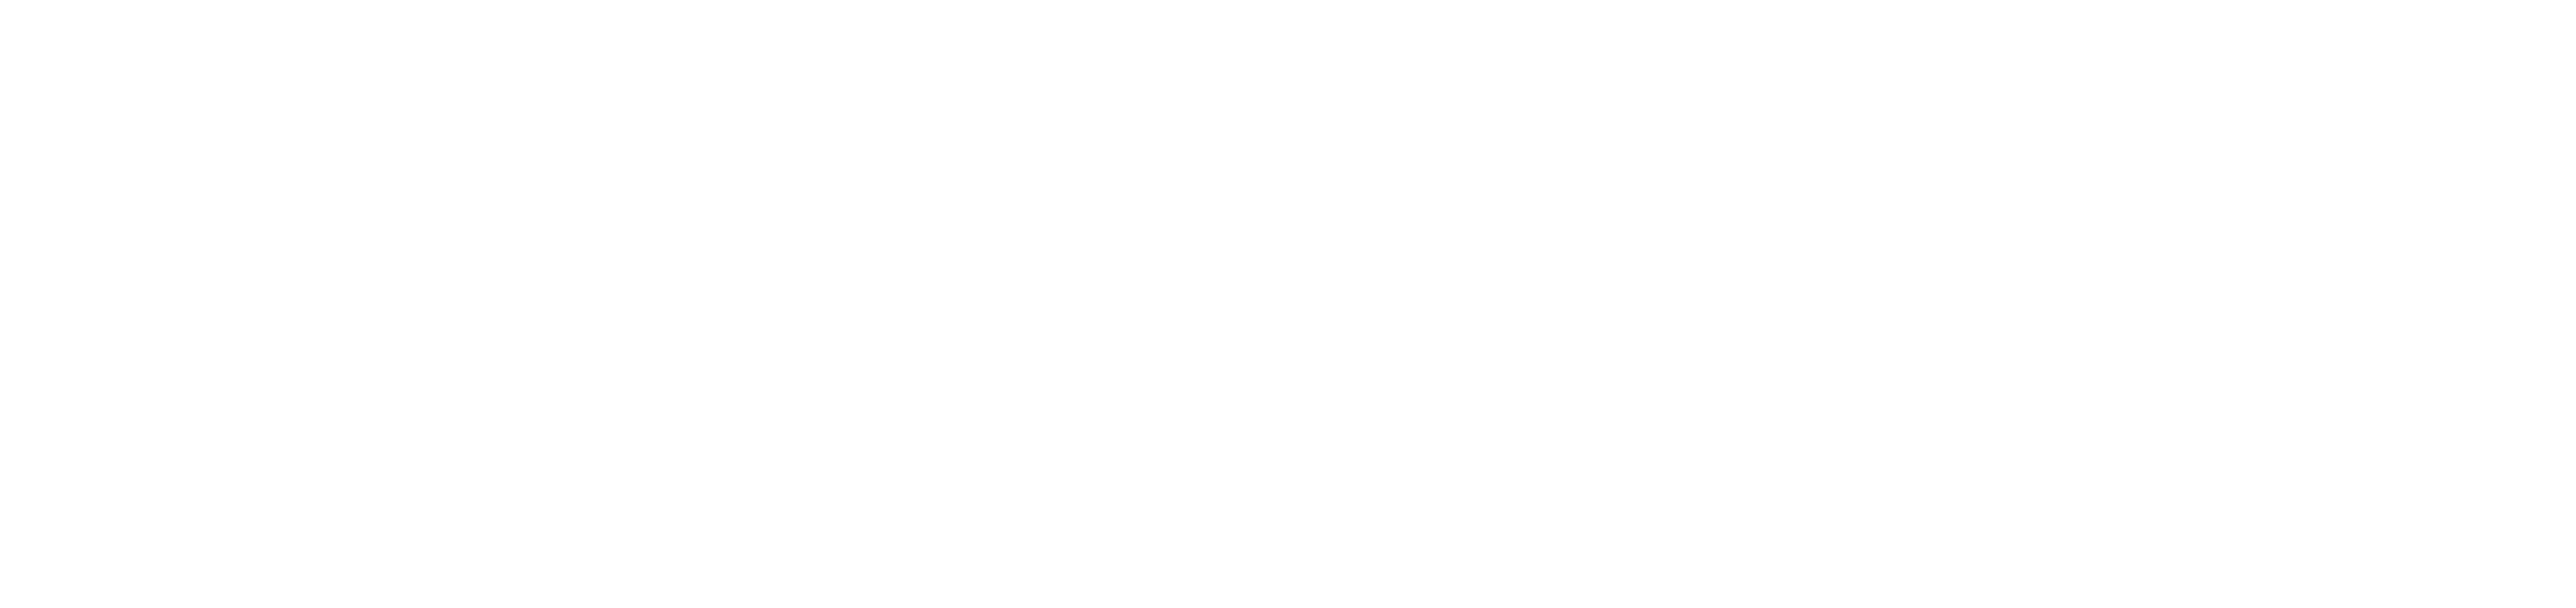 large gray and white banner logo for Elementa Silver - revolutionary oral care